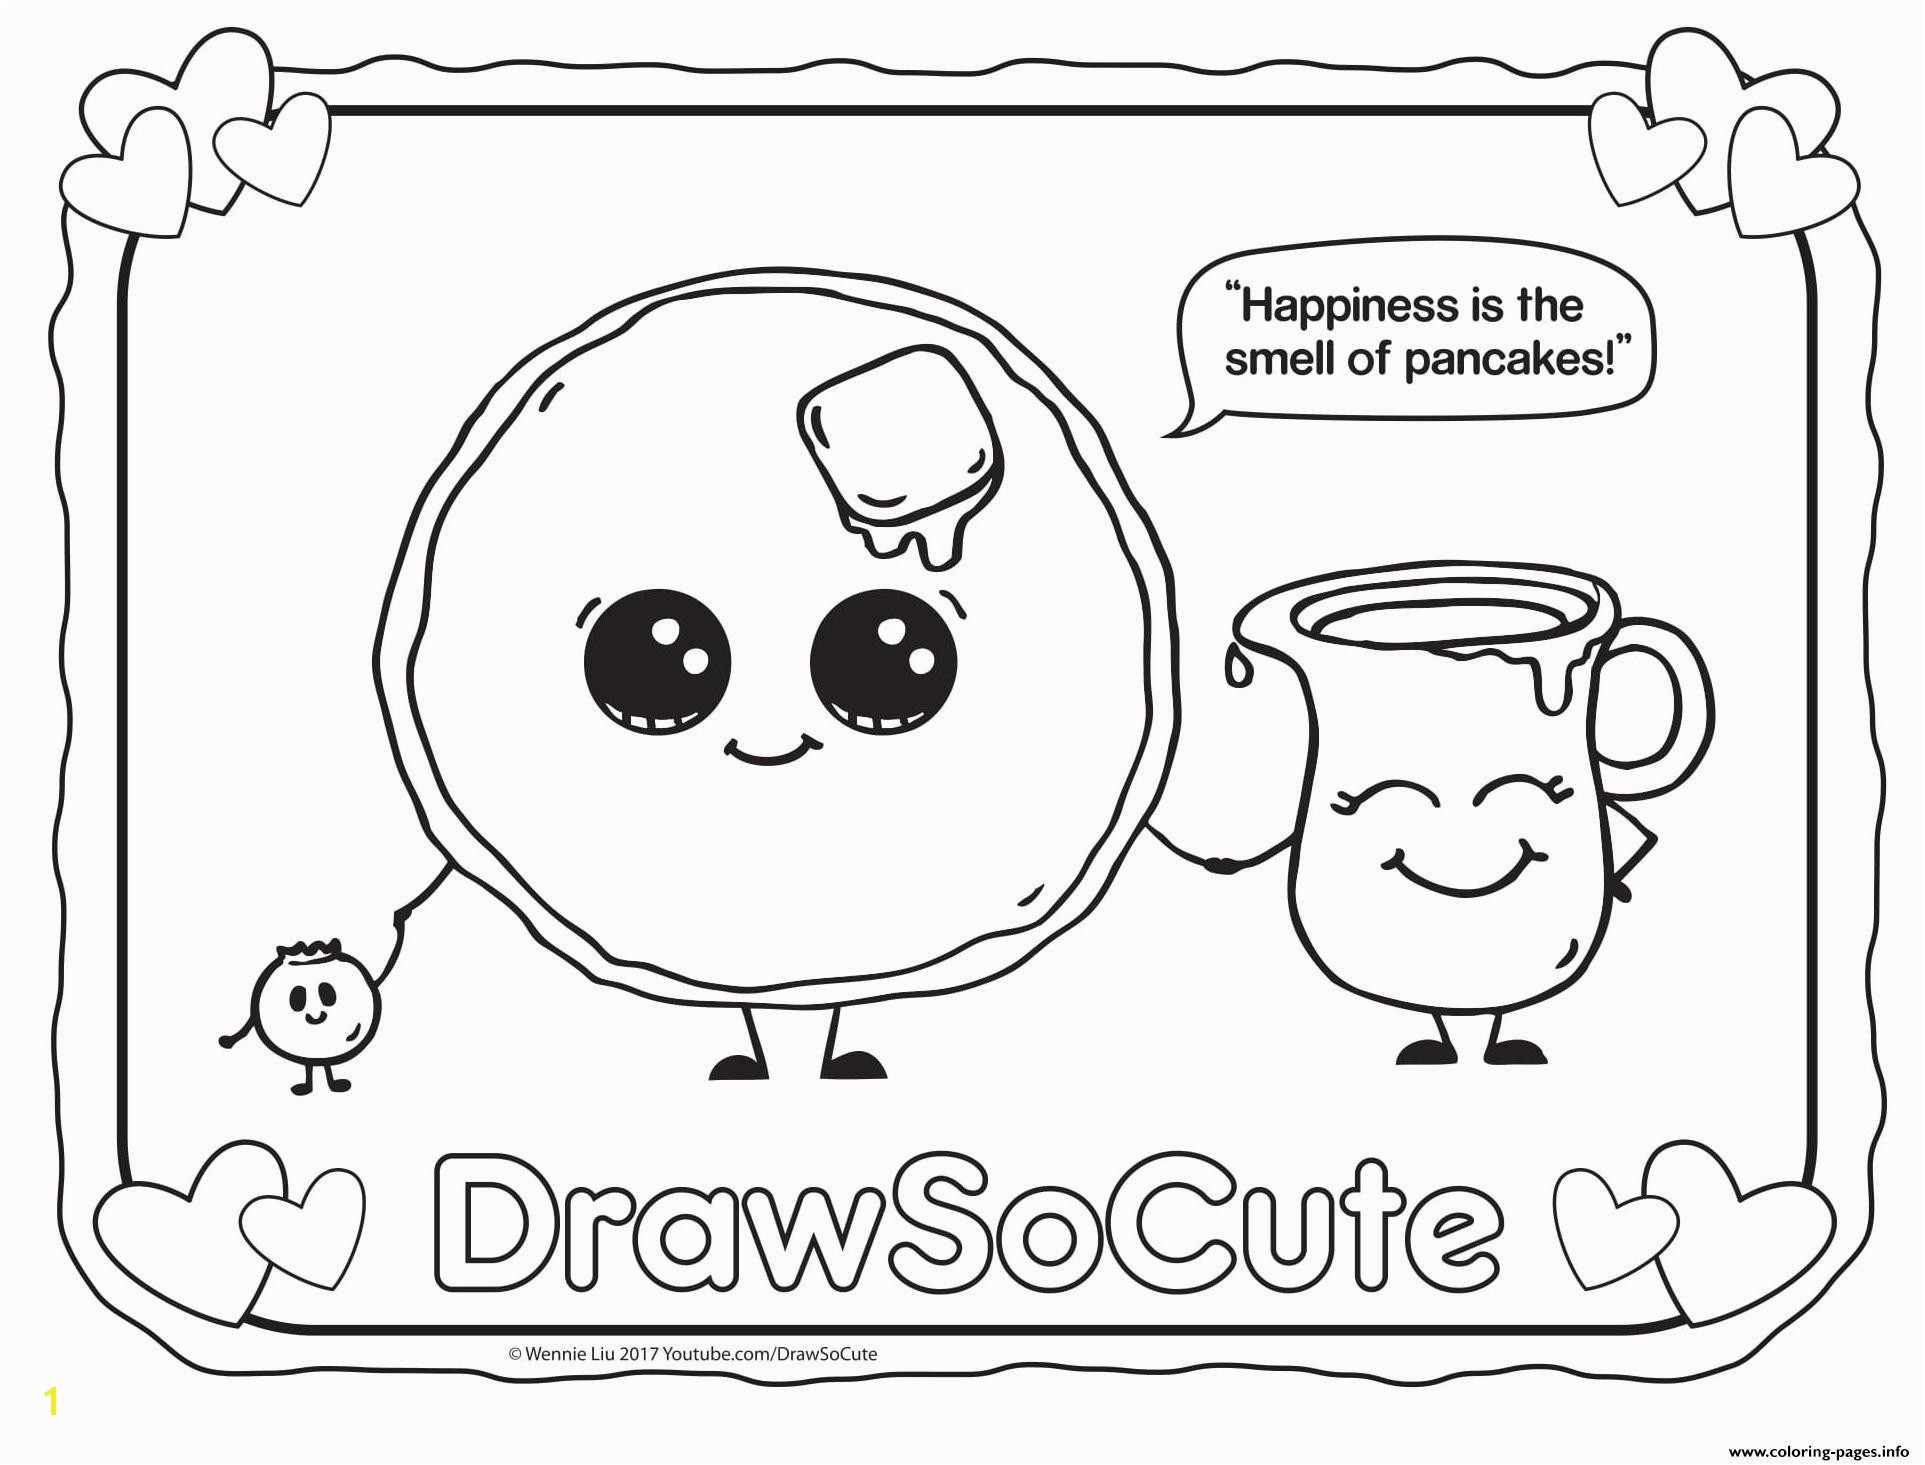 Draw so Cute Animal Coloring Pages Www Coloring Pages New Coloring Pages Drawings Fresh S Cute Drawing